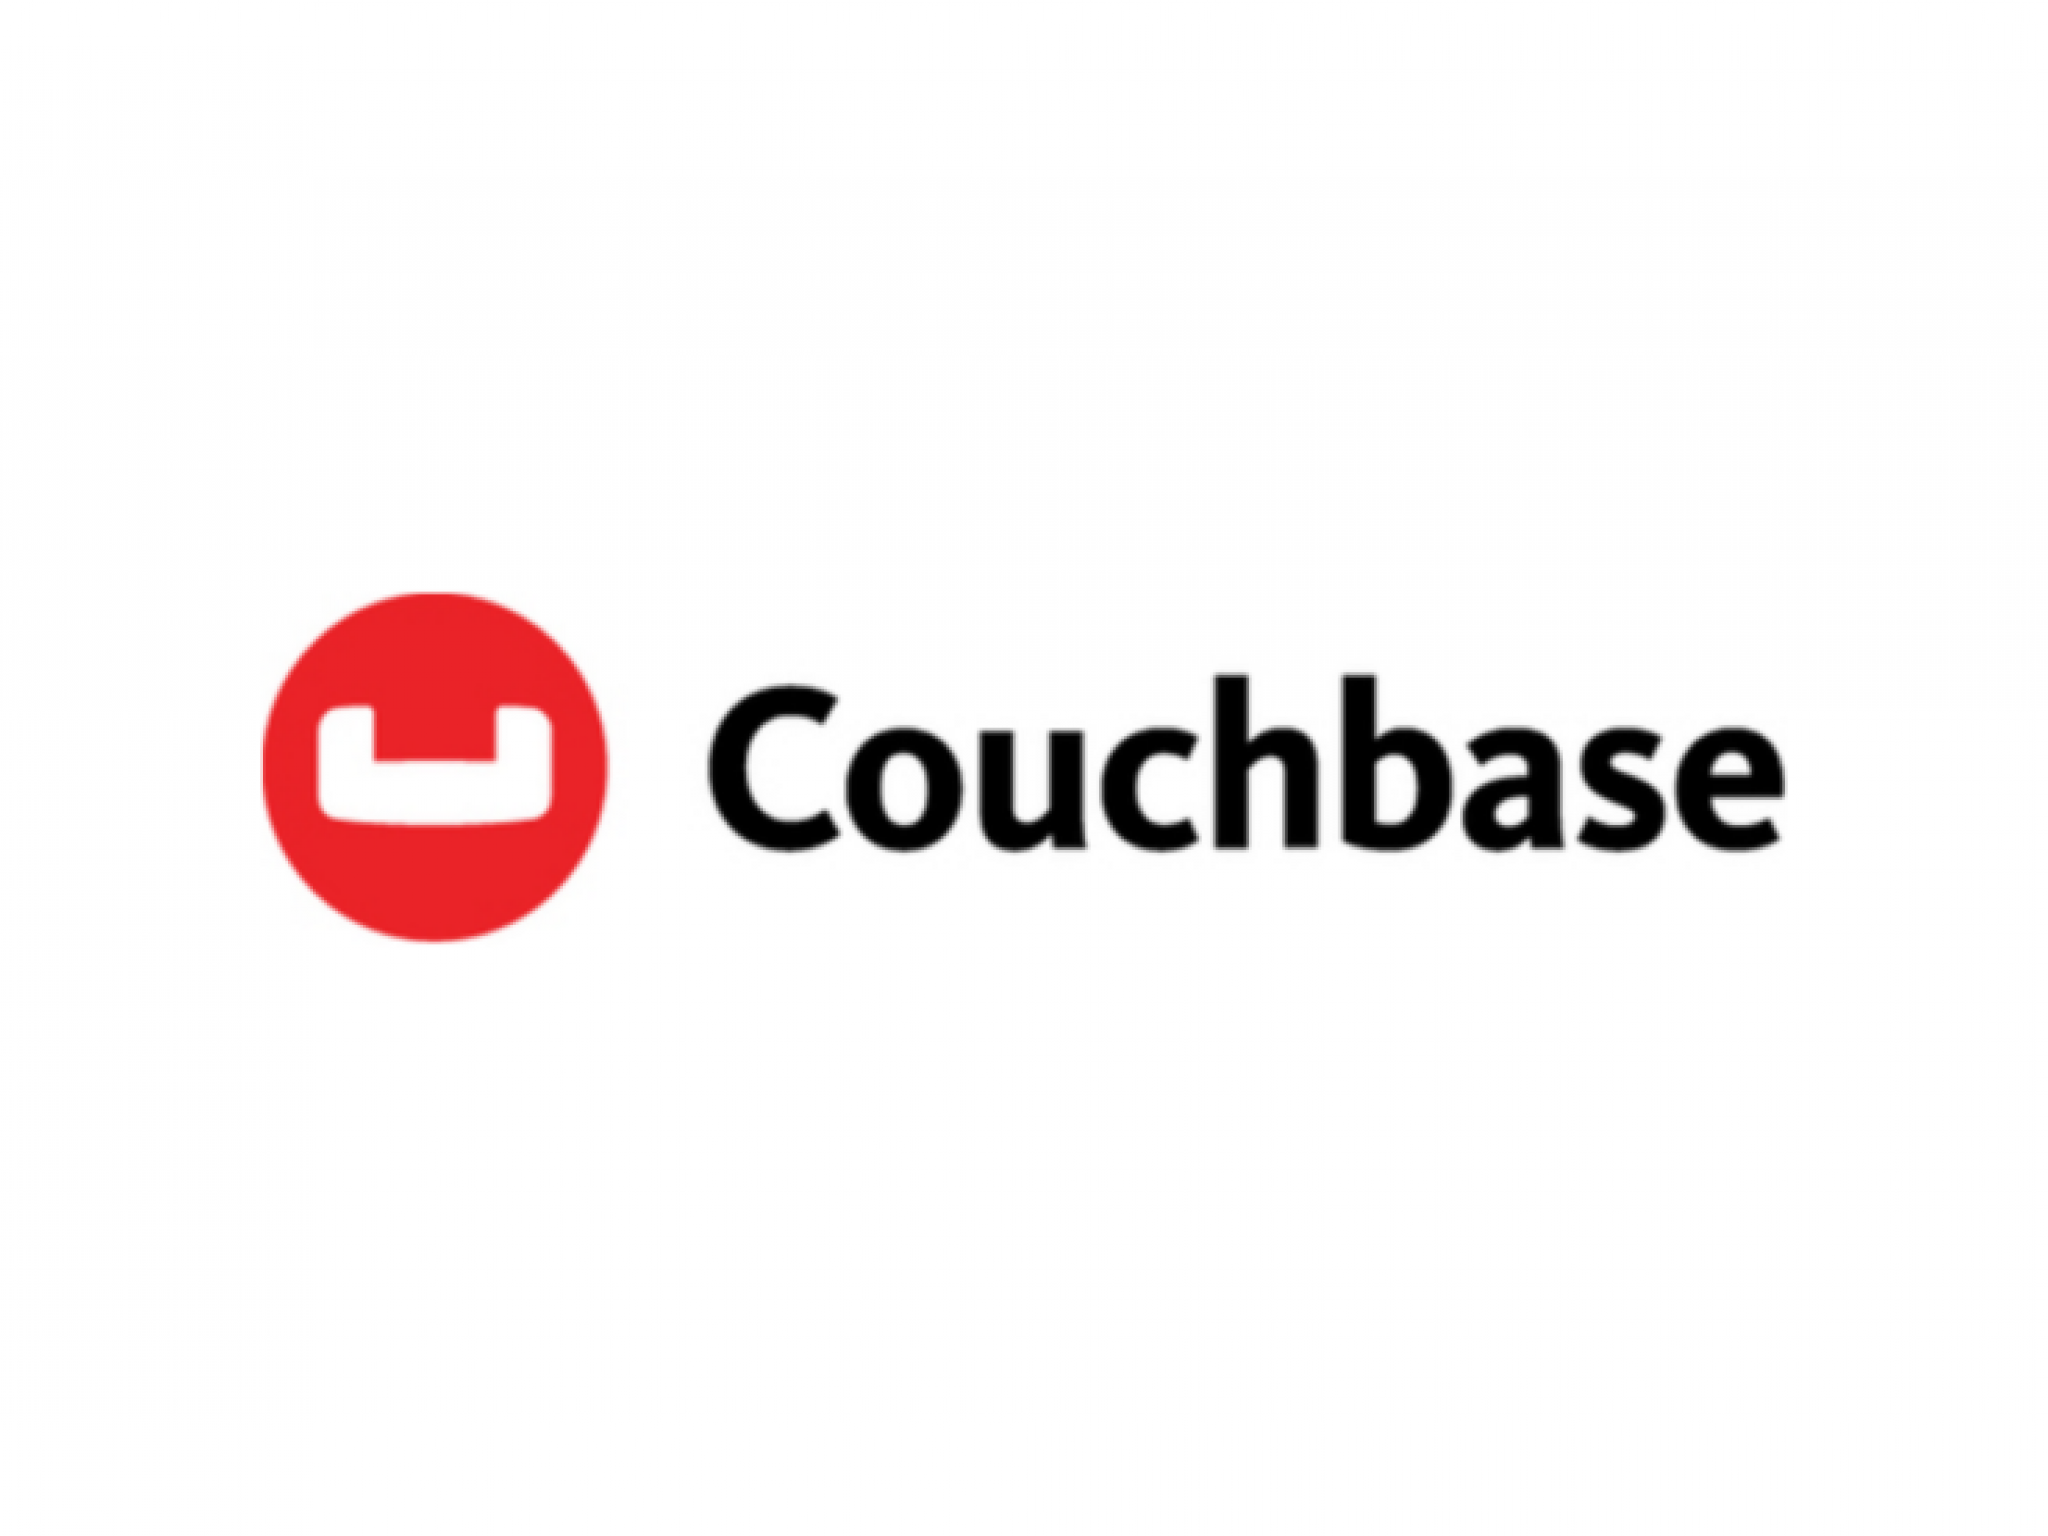  why-couchbase-shares-are-up-wednesday 